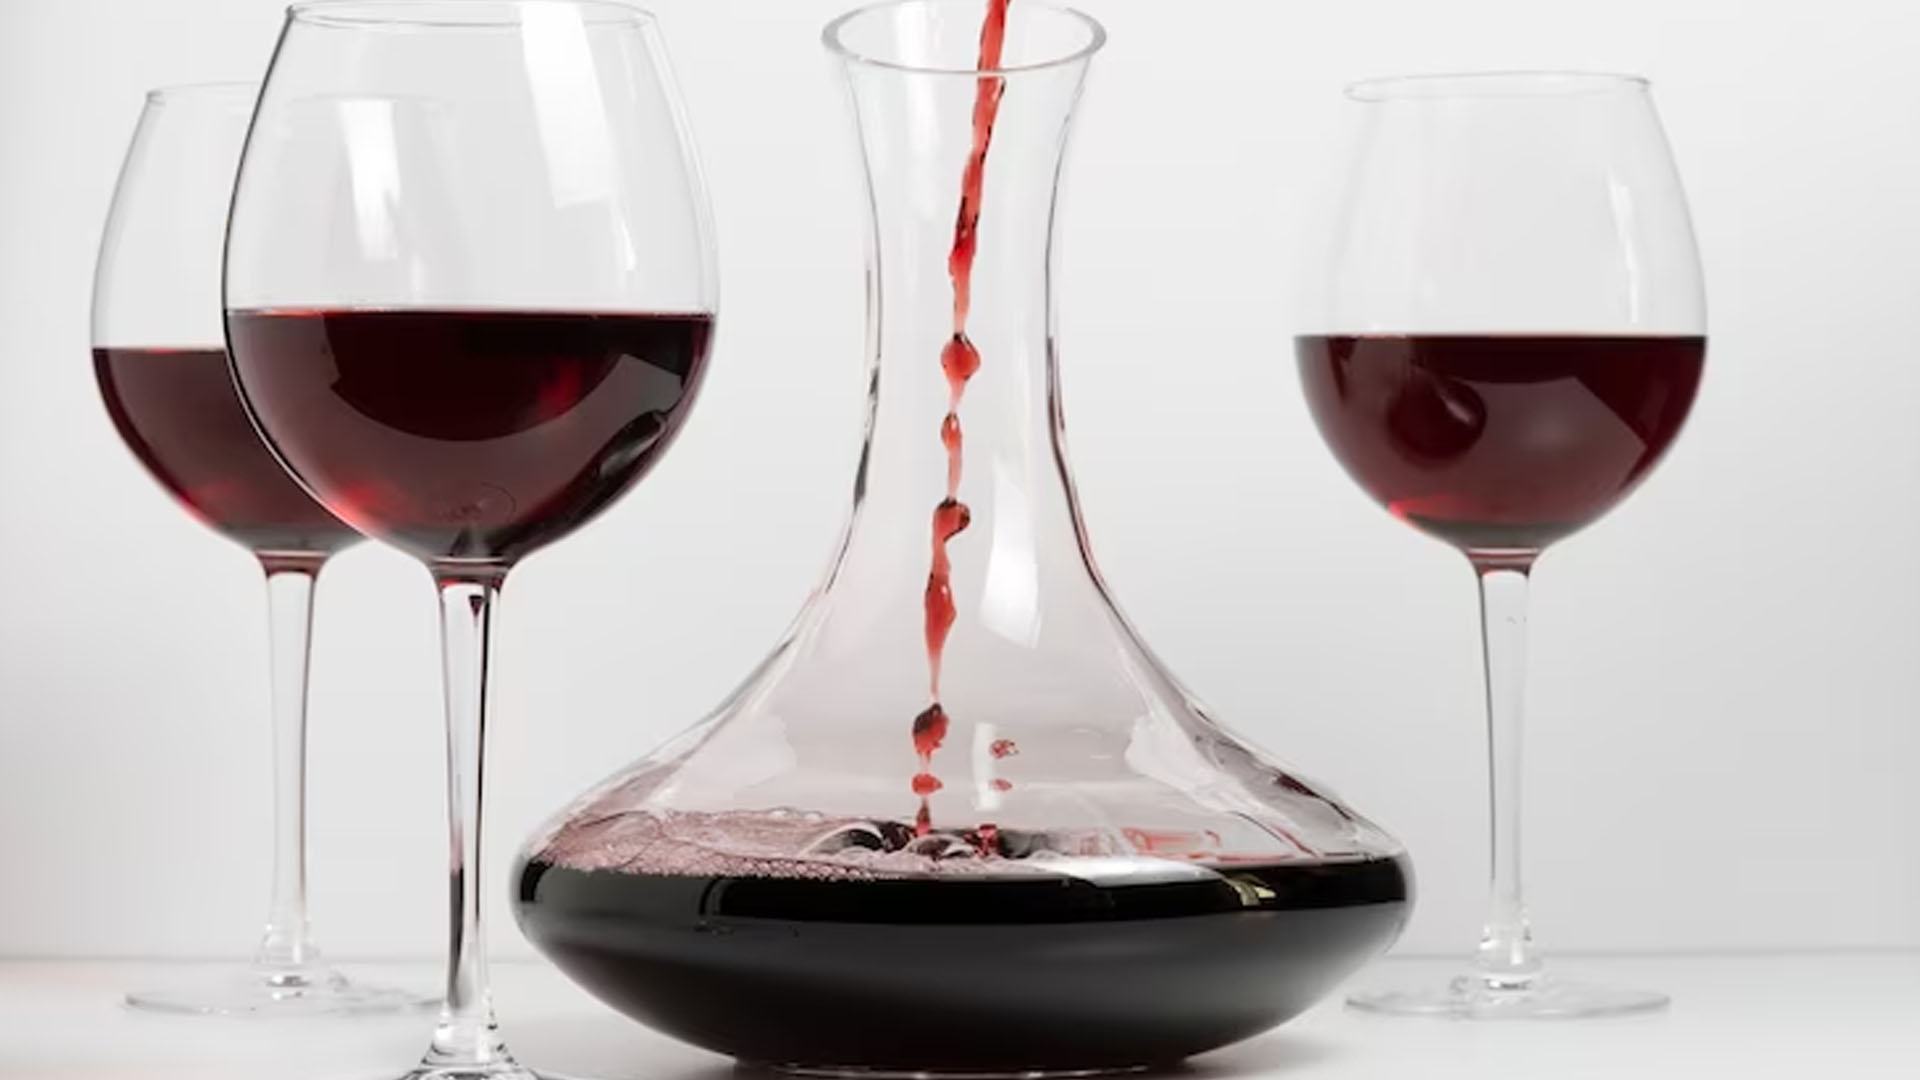 How Much Dealcoholized Red Wine To Drink For Health Benefits?